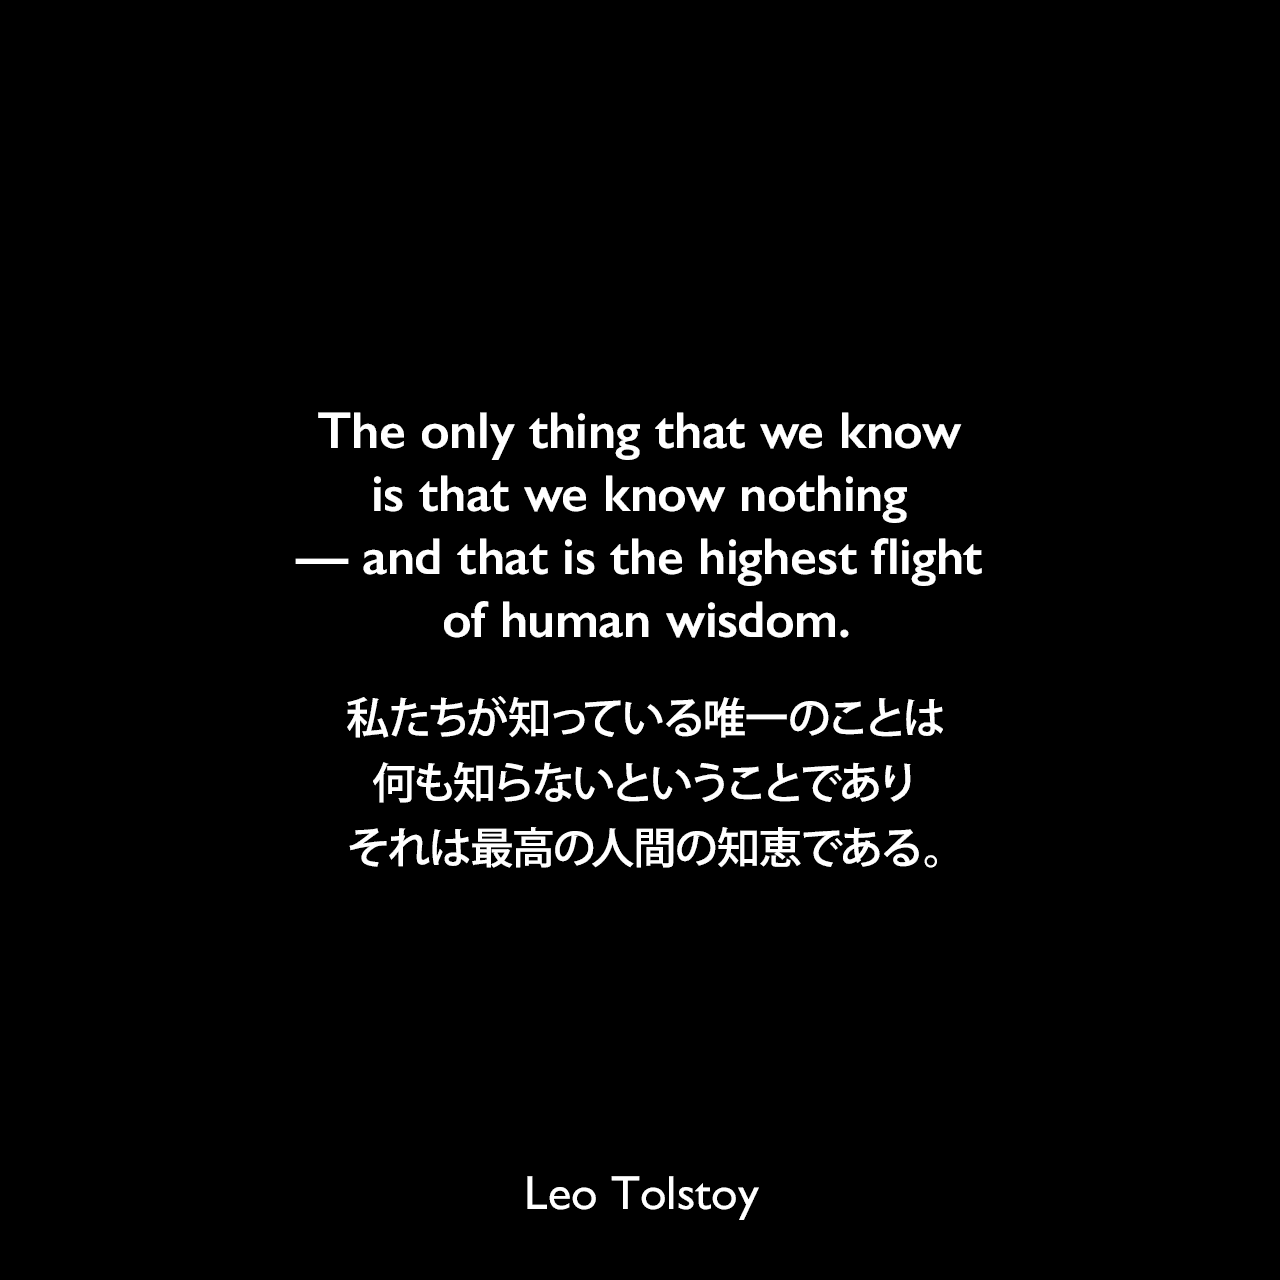 The only thing that we know is that we know nothing — and that is the highest flight of human wisdom.私たちが知っている唯一のことは、何も知らないということであり、それは最高の人間の知恵である。- トルストイによる小説「戦争と平和」よりLeo Tolstoy